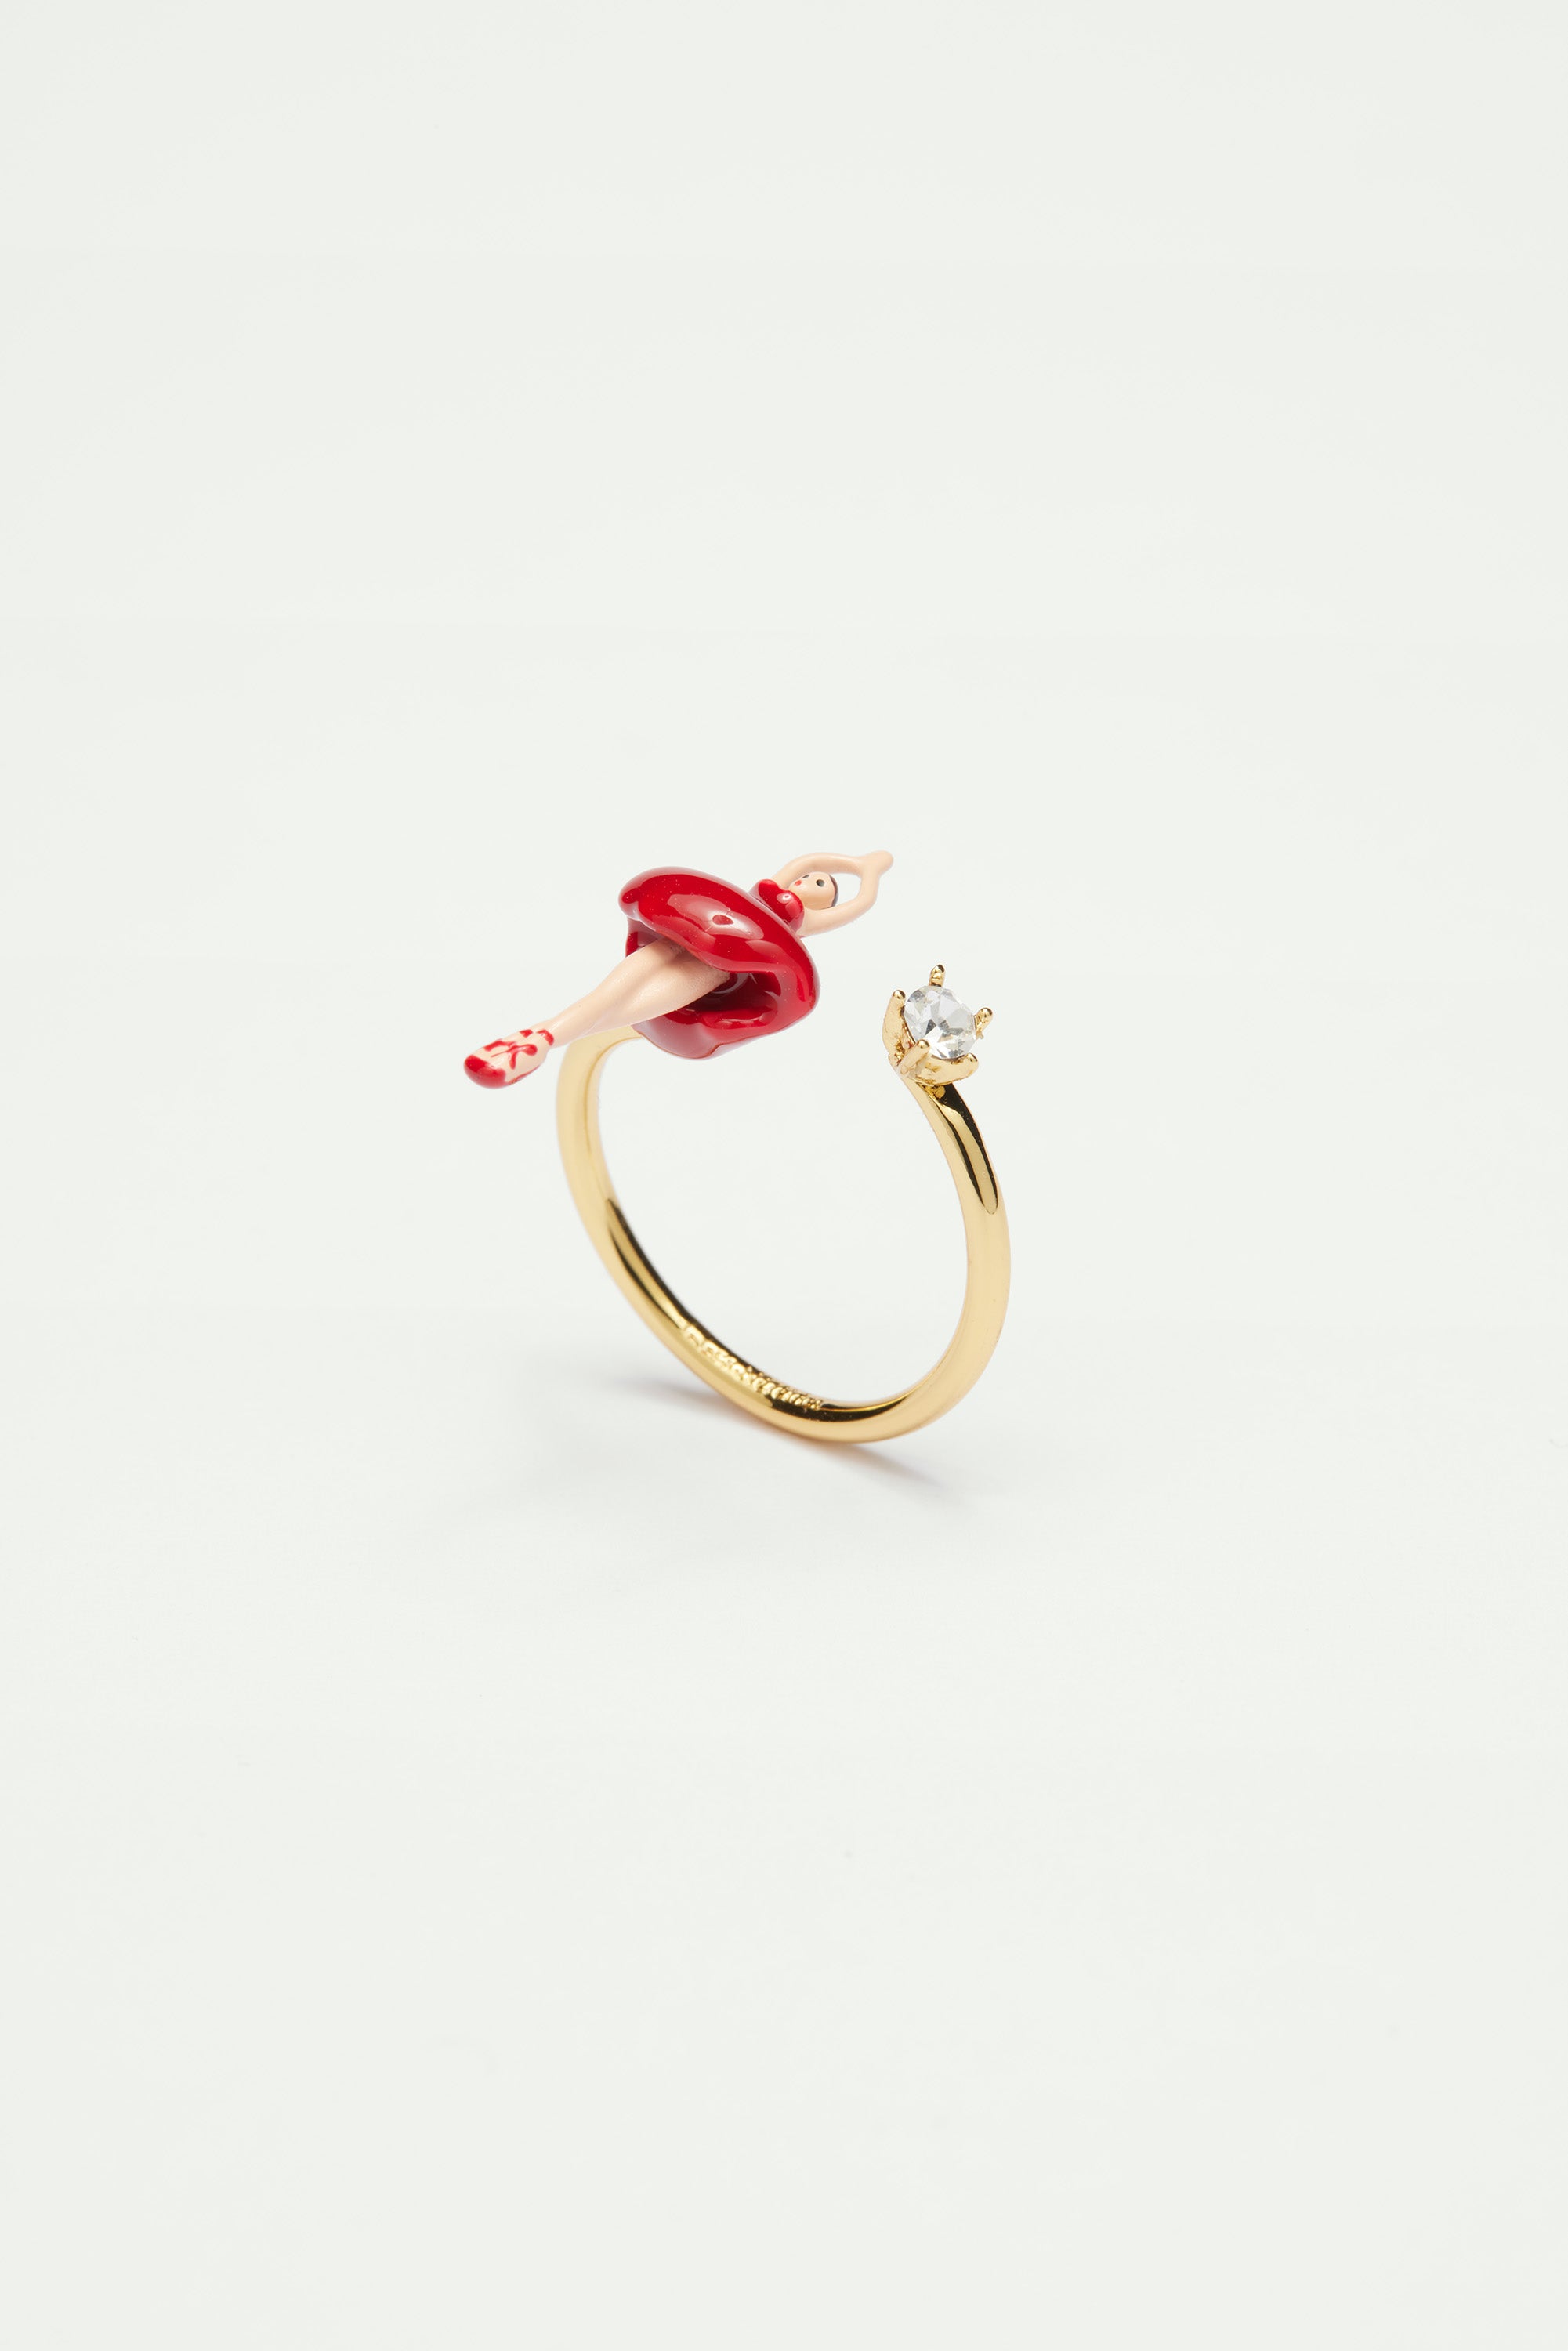 Adjustable ring with mini ballerina in a red tutu